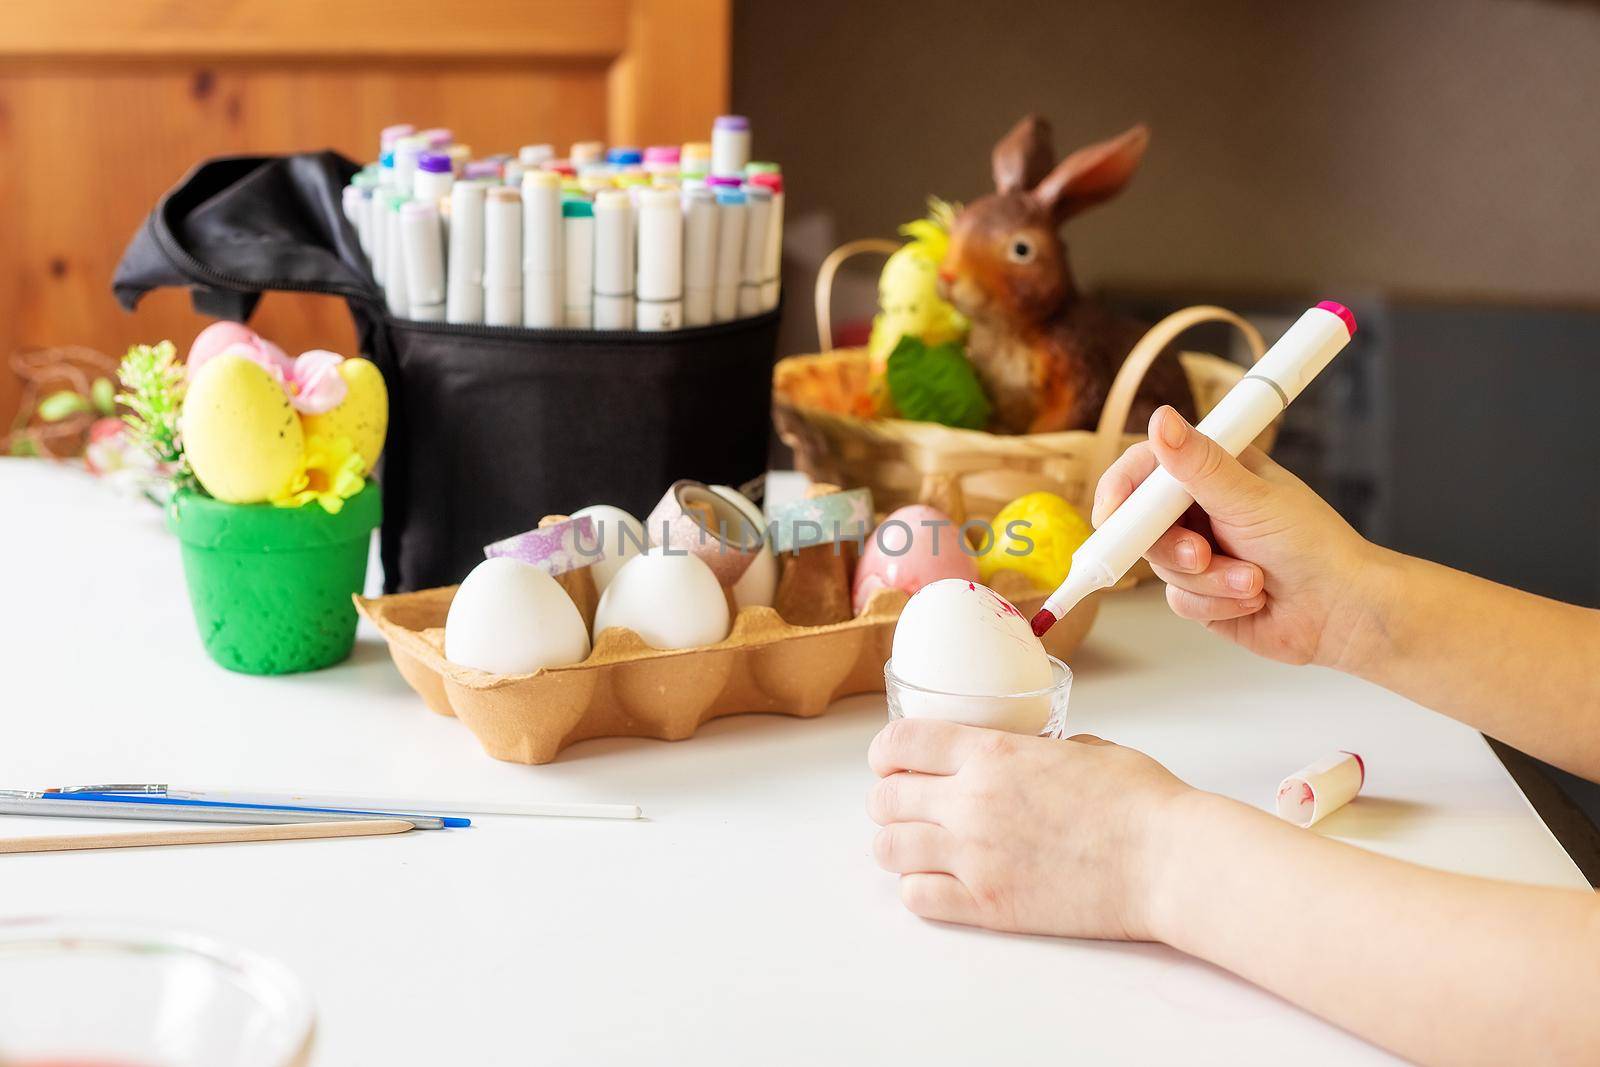 A close-up on the hands of a small Caucasian girl 5 years old paints eggs with special markers paints for the Christian spring holiday of Easter. Girl dressed in a yellow floral dress